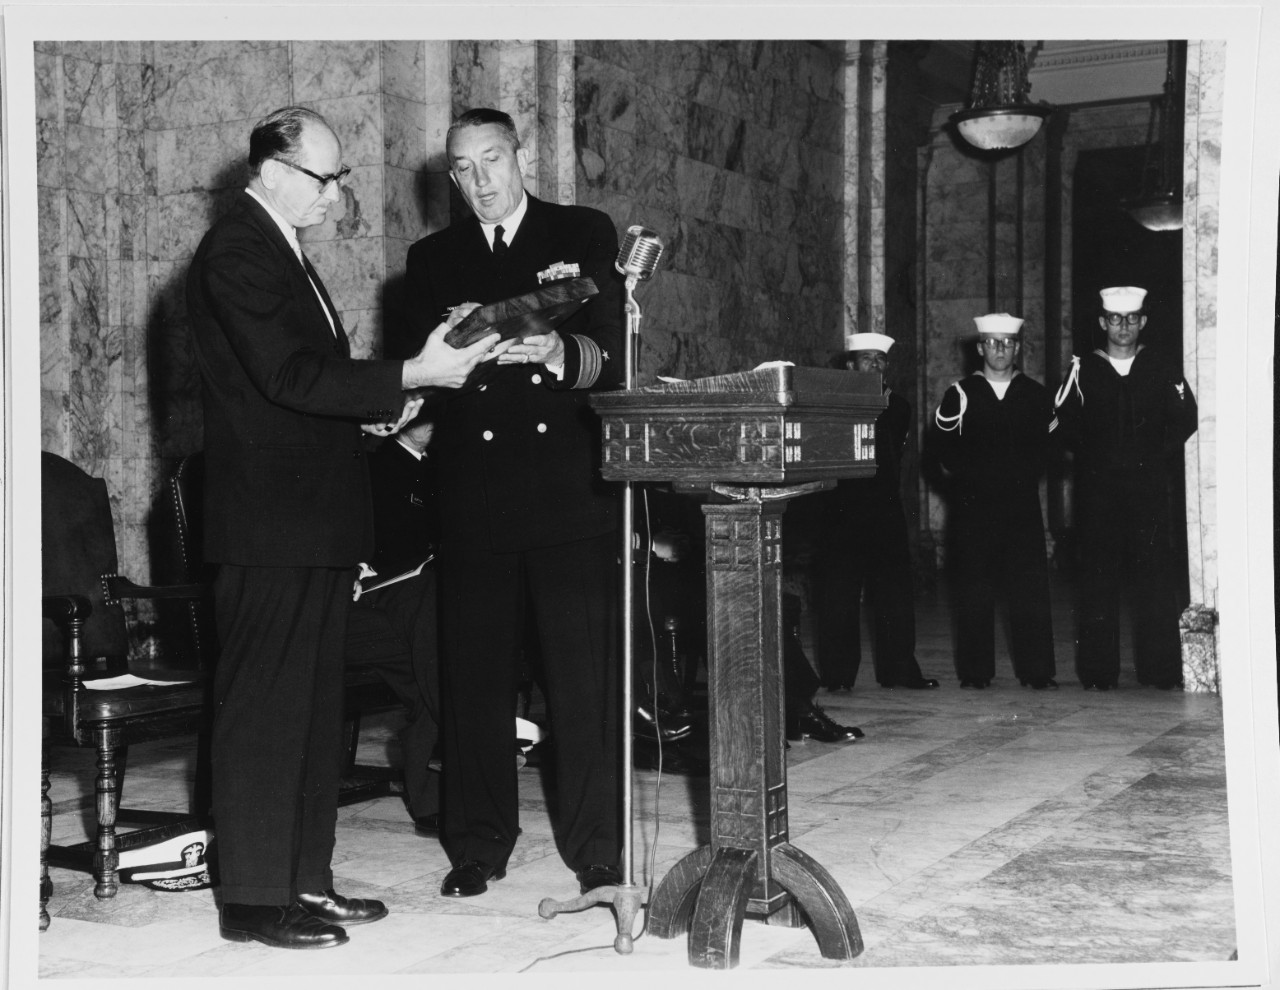 Rear Admiral Towner presenting a plaque to Governor Rosseleni at Memorial of Battleship USS WASHINGTON (BB-56)